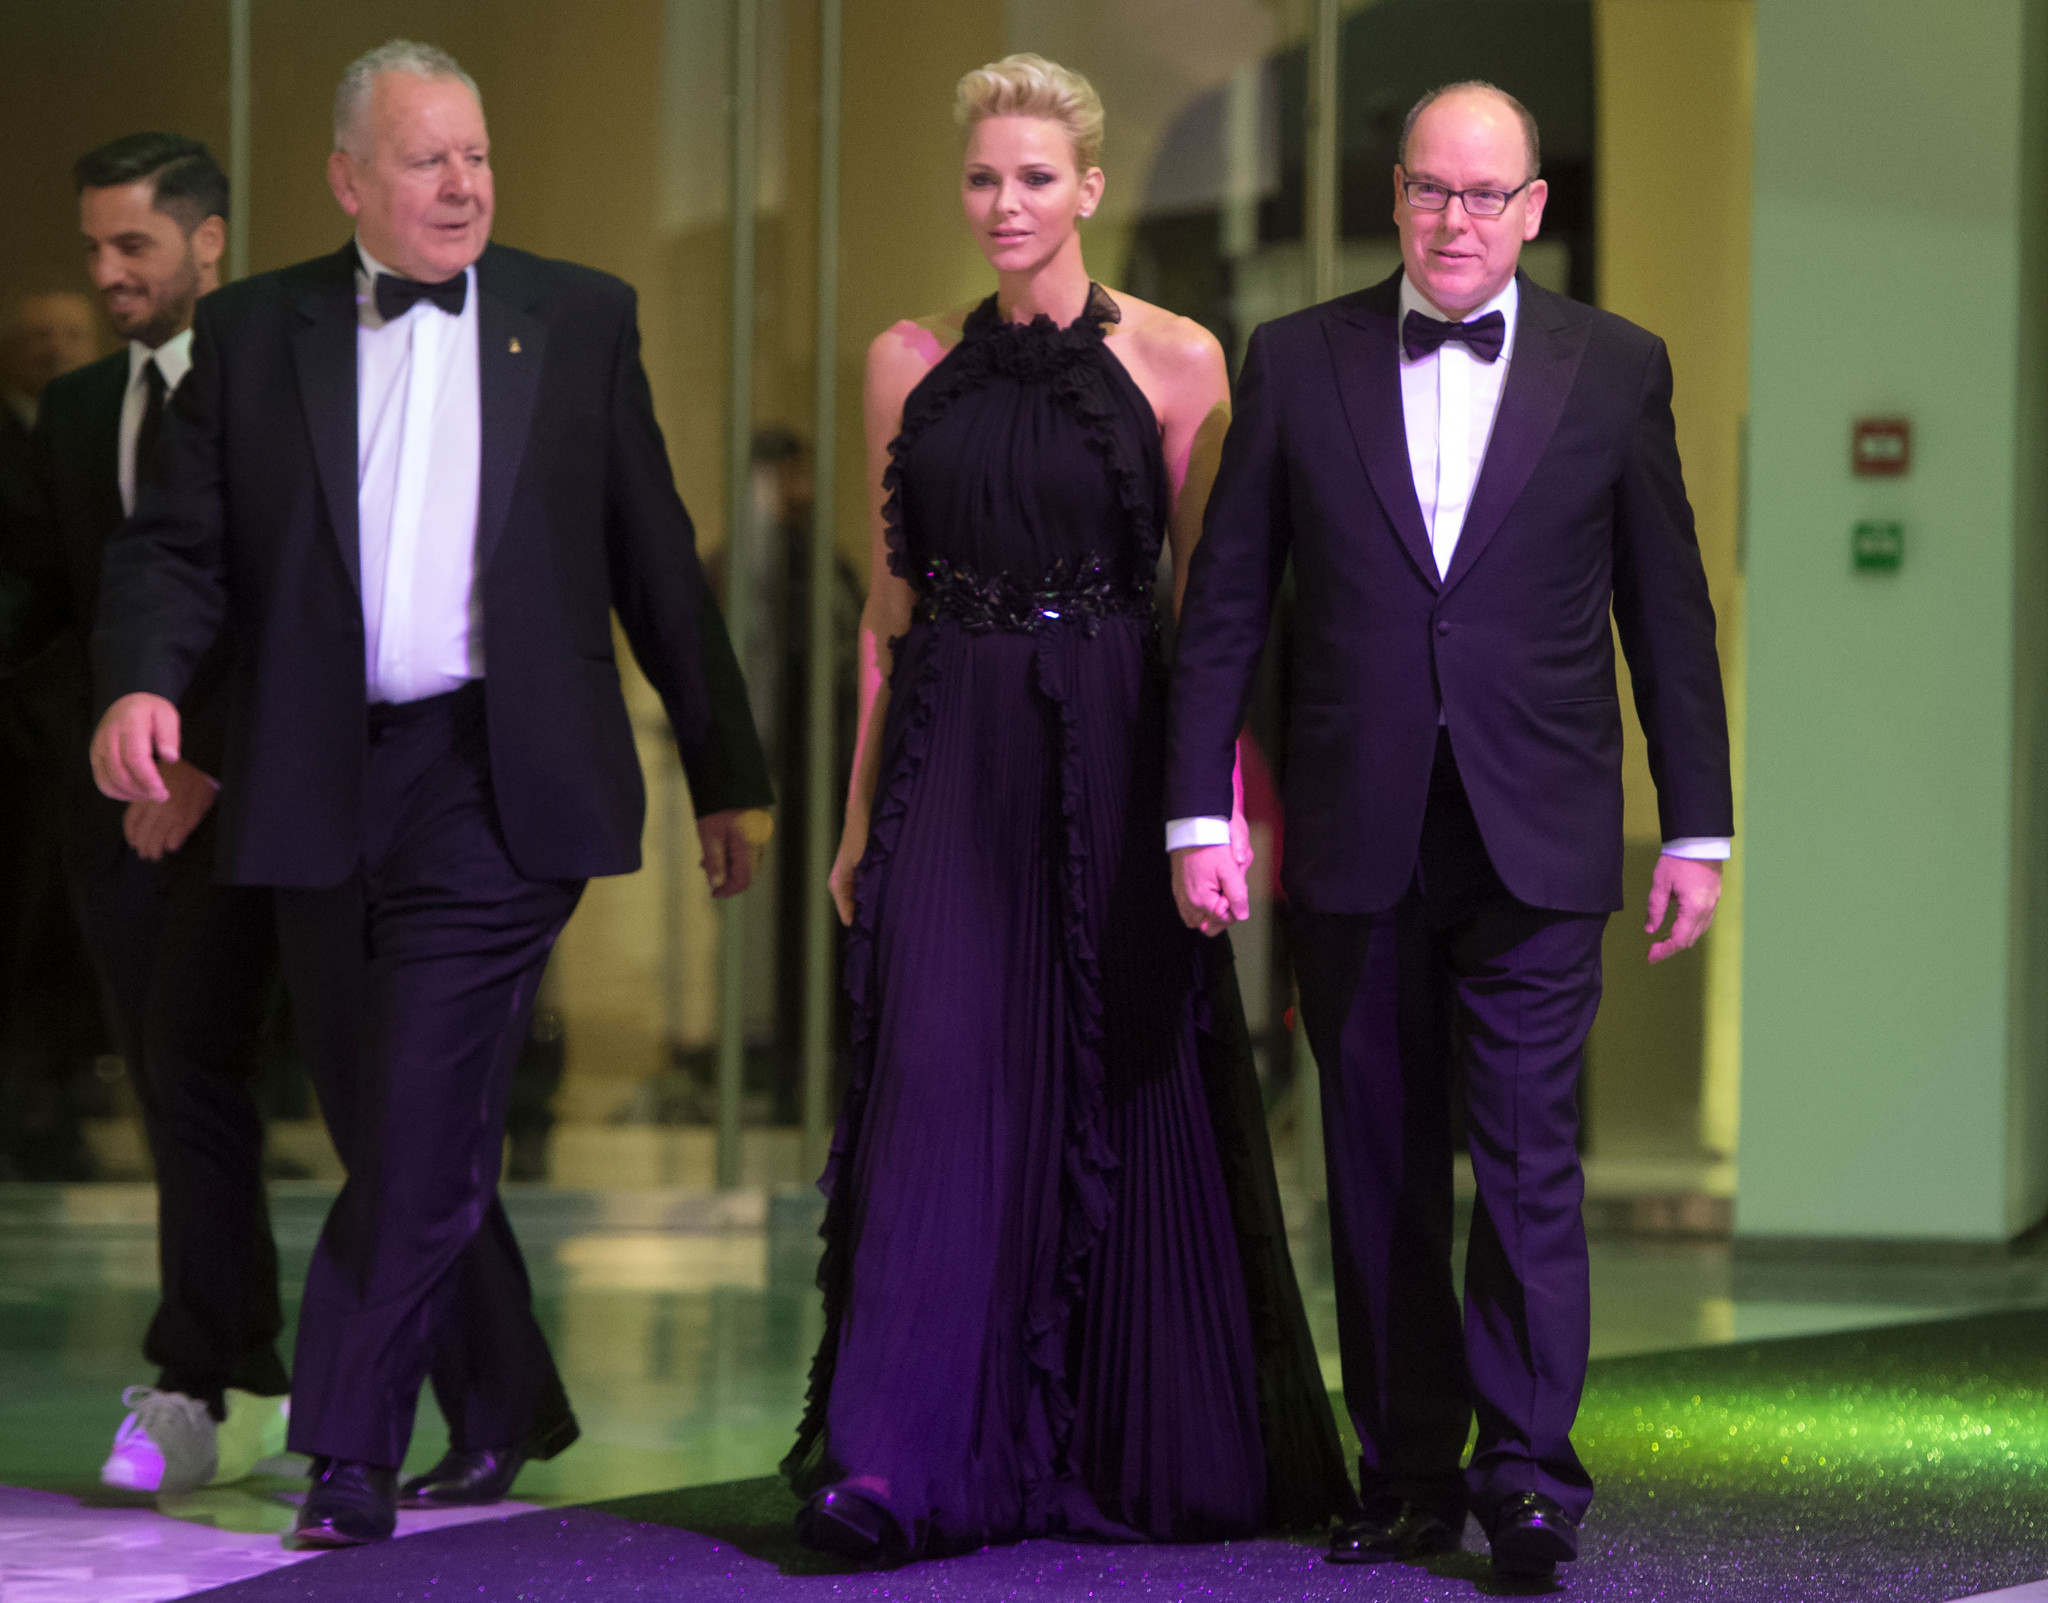 World Rugby chairman Bill Beaumont, left, attending last night's World Rugby Awards in Monaco with Prince Albert II of Monaco and his wife Princess Charlene of Monaco ©Getty Images